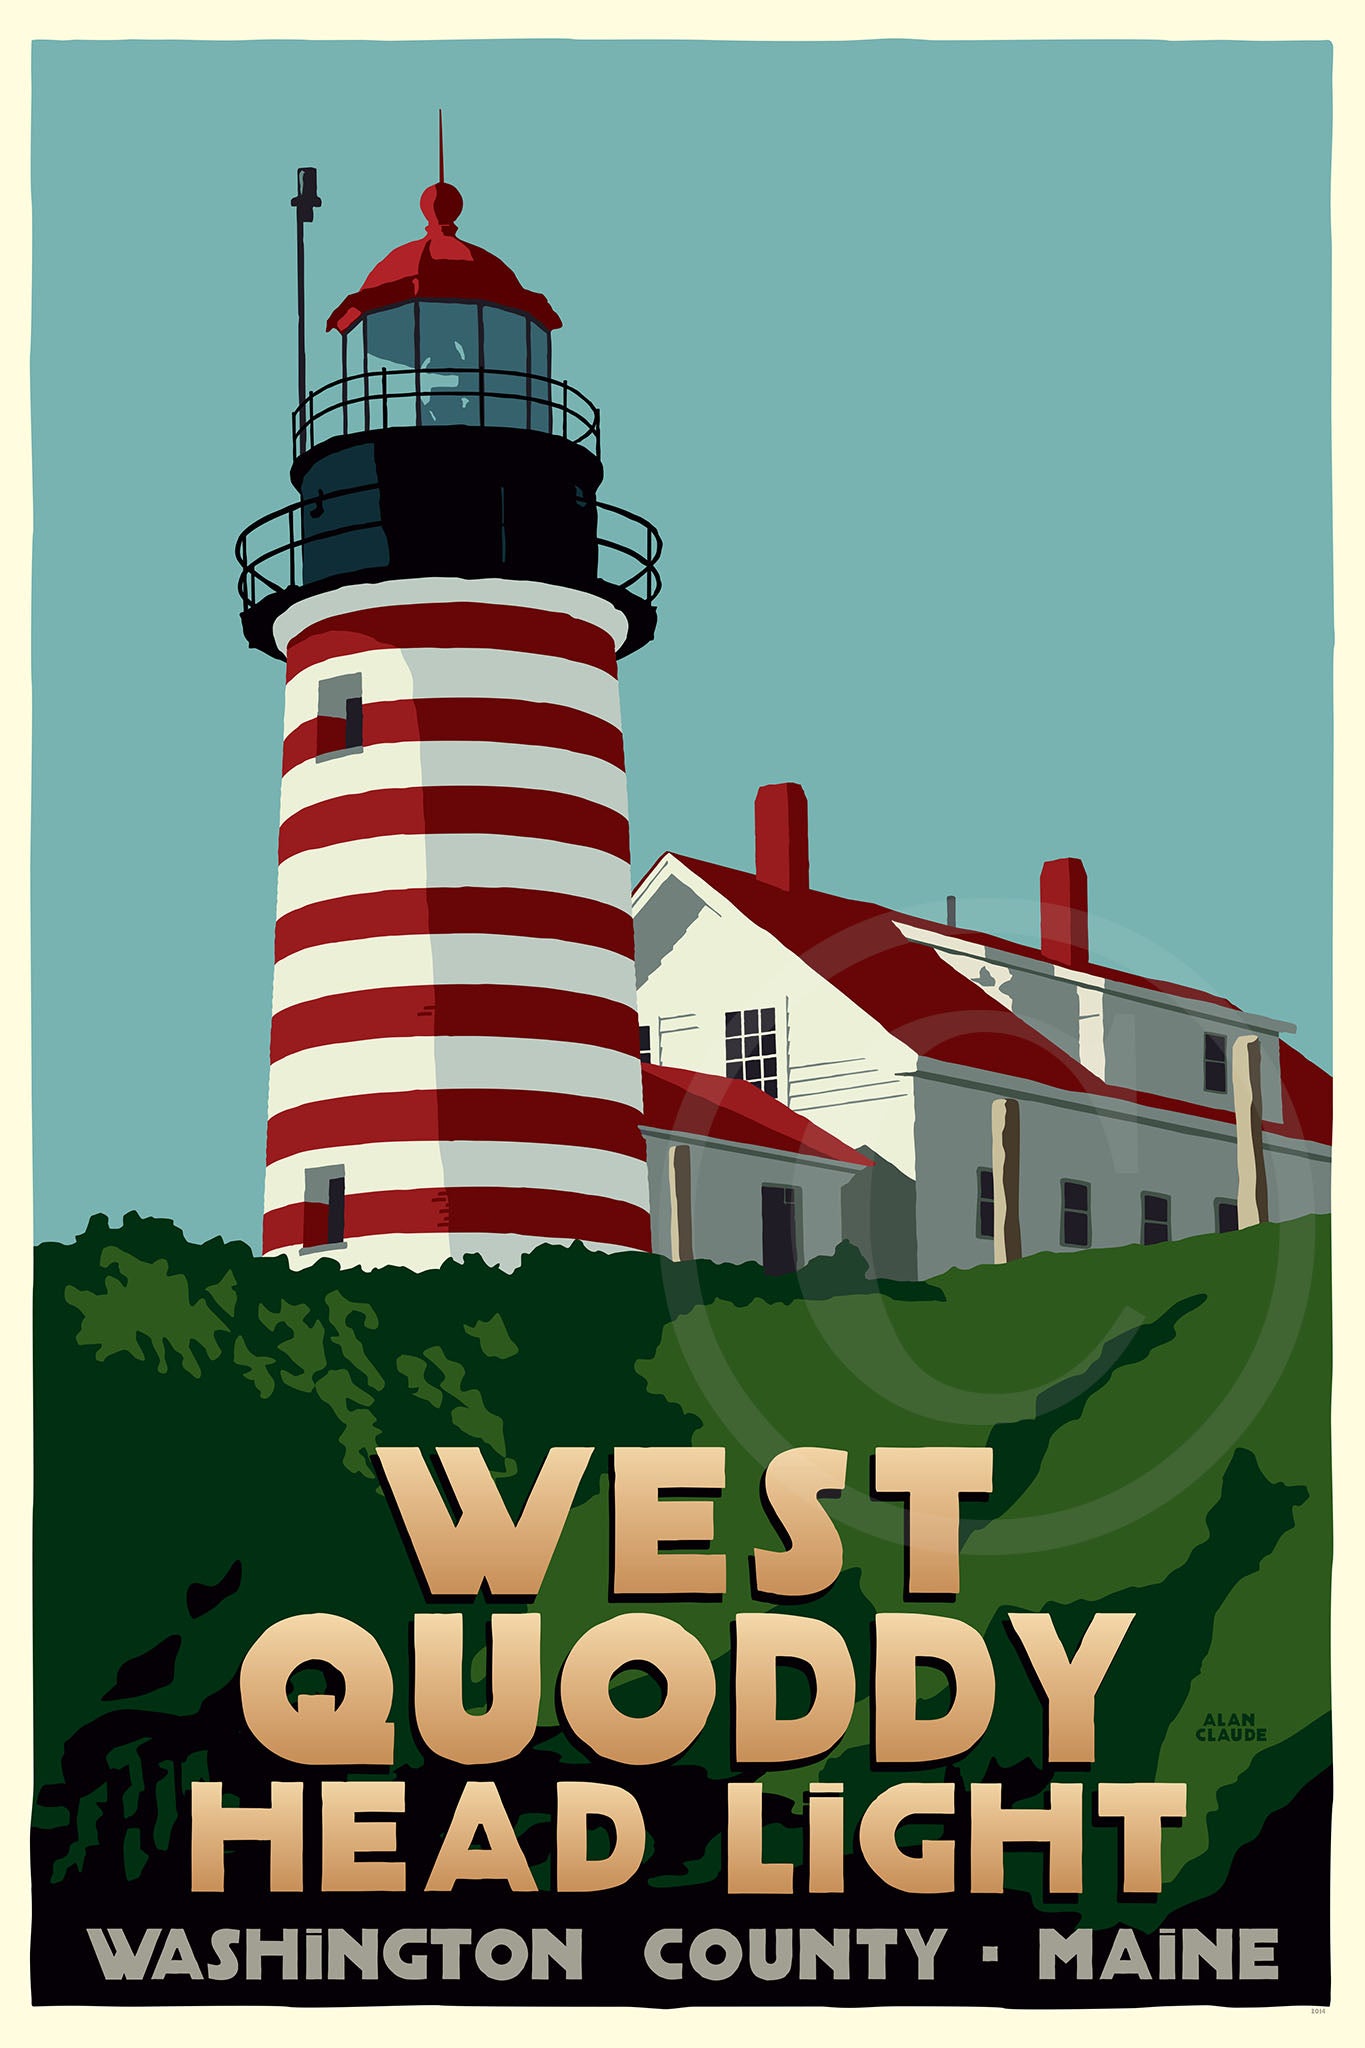 West Quoddy Head Light Art Print 36" x 53" Travel Poster By Alan Claude - Maine